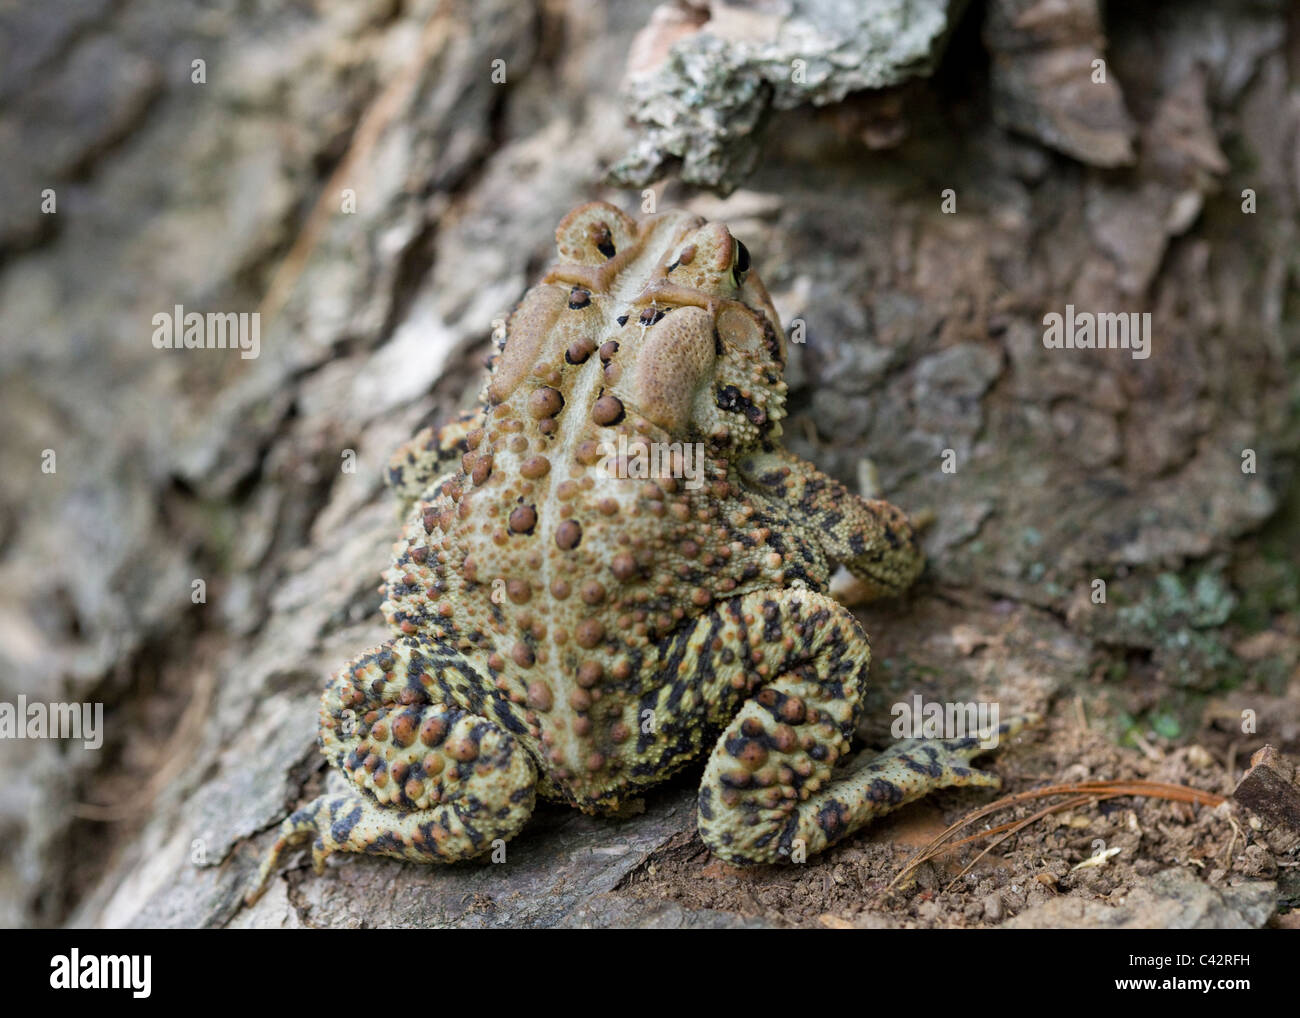 Camouflaged North American Fowler's toad (Anaxyrus fowleri) sitting on log  - Virginia, USA Stock Photo